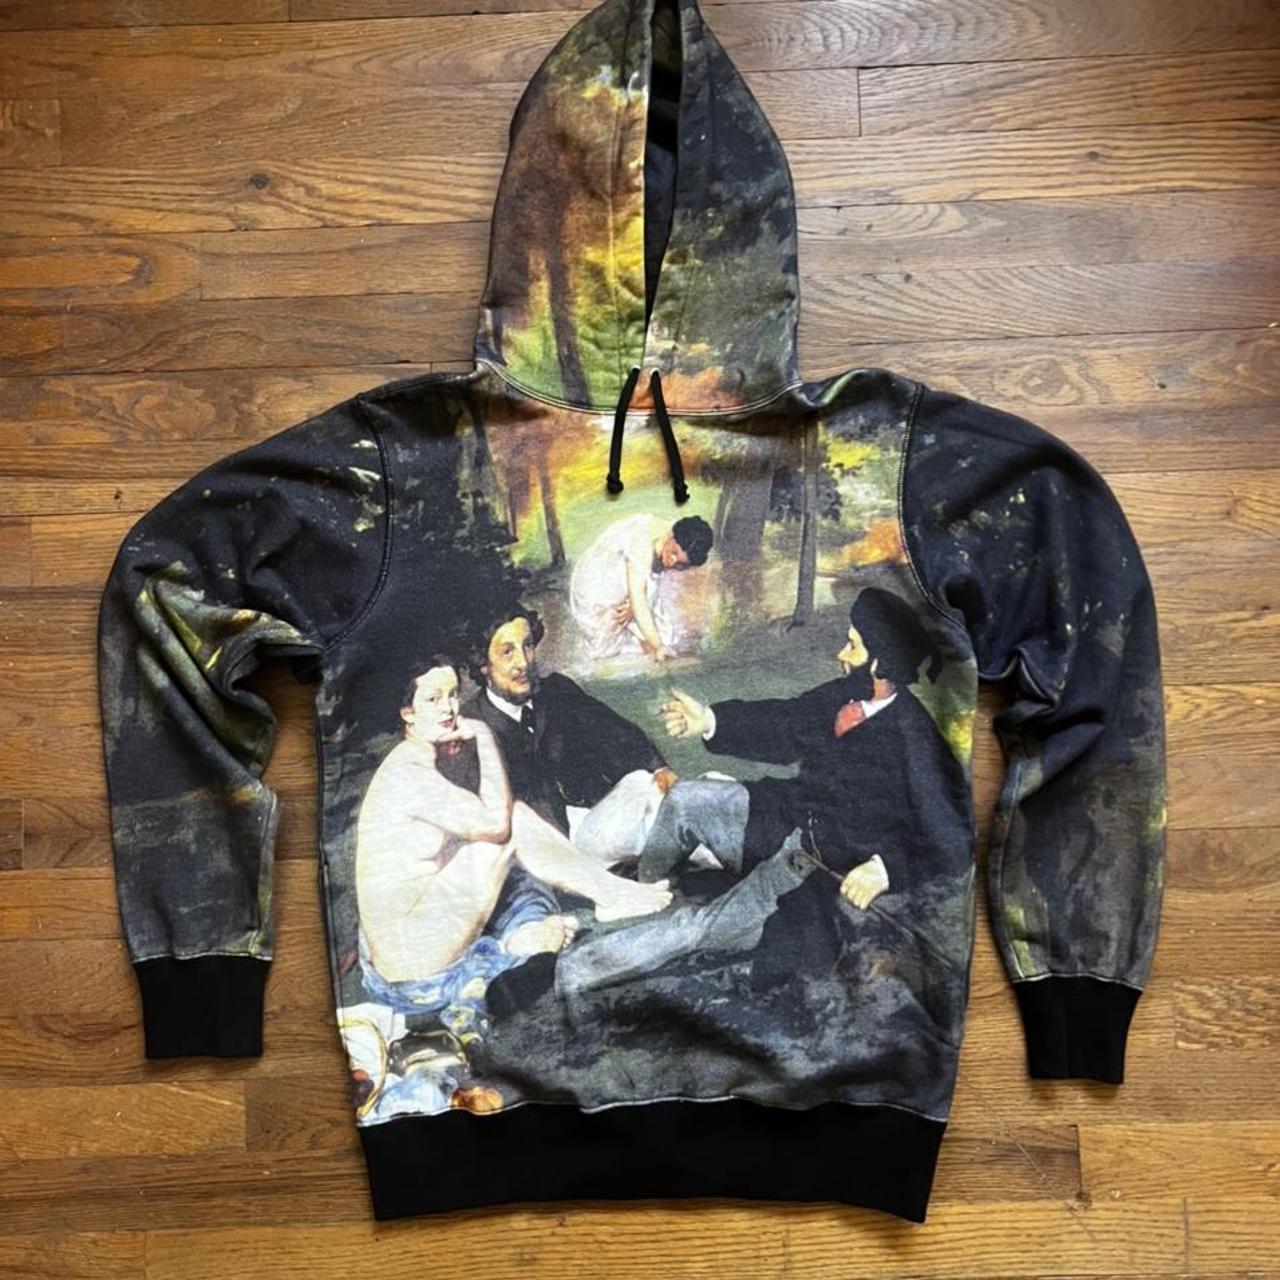 Supreme s/s 2014 Le Bain all over print hoodie. For...